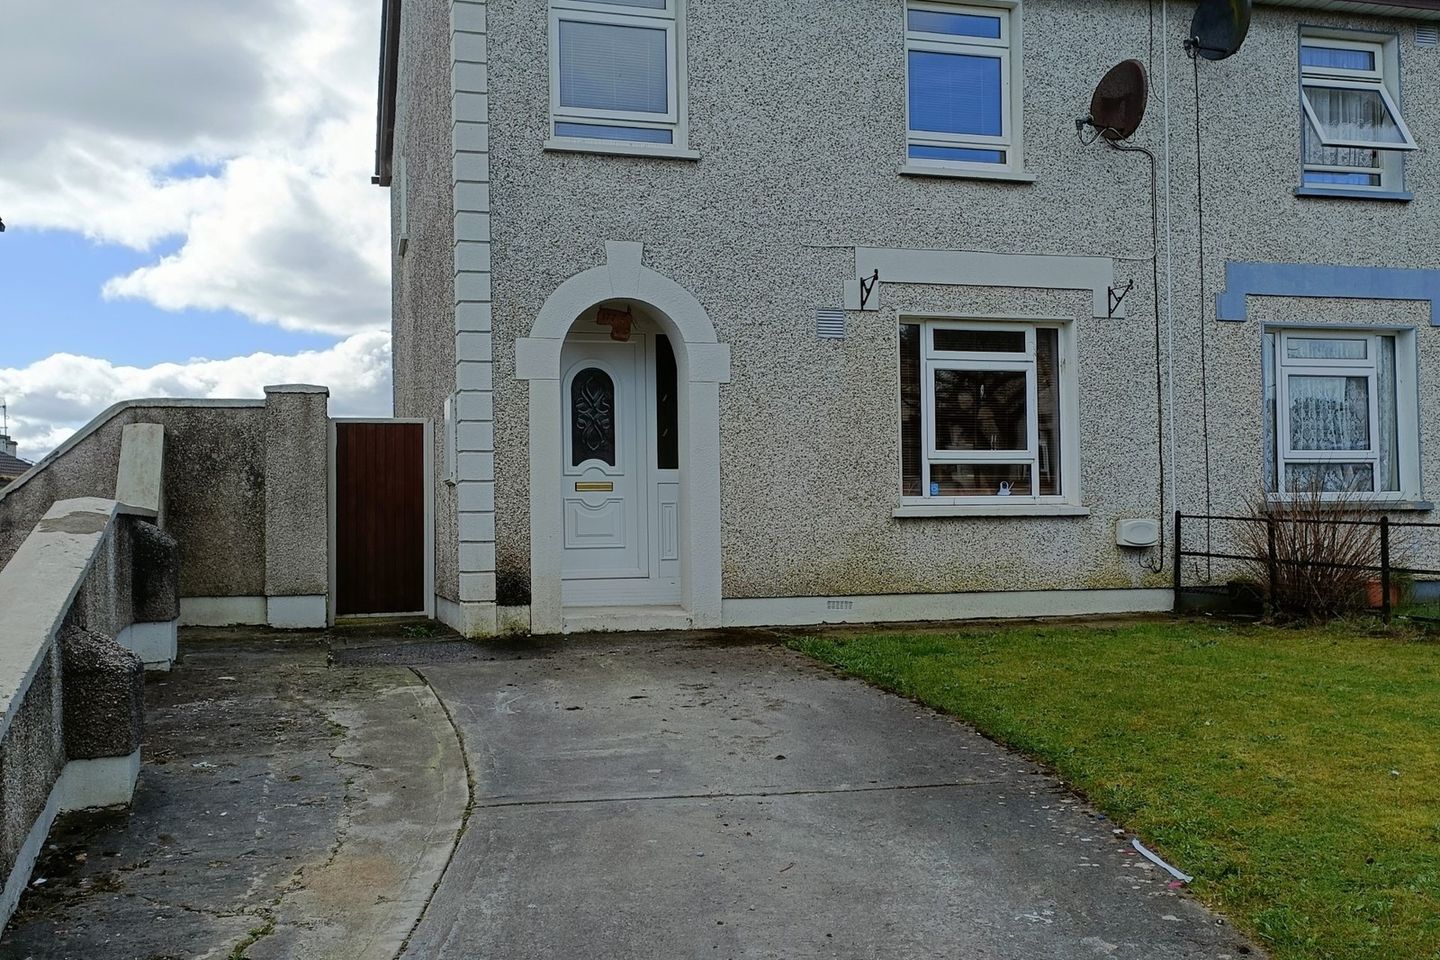 177 Church View Heights, Edenderry, Co. Offaly, R45FF95